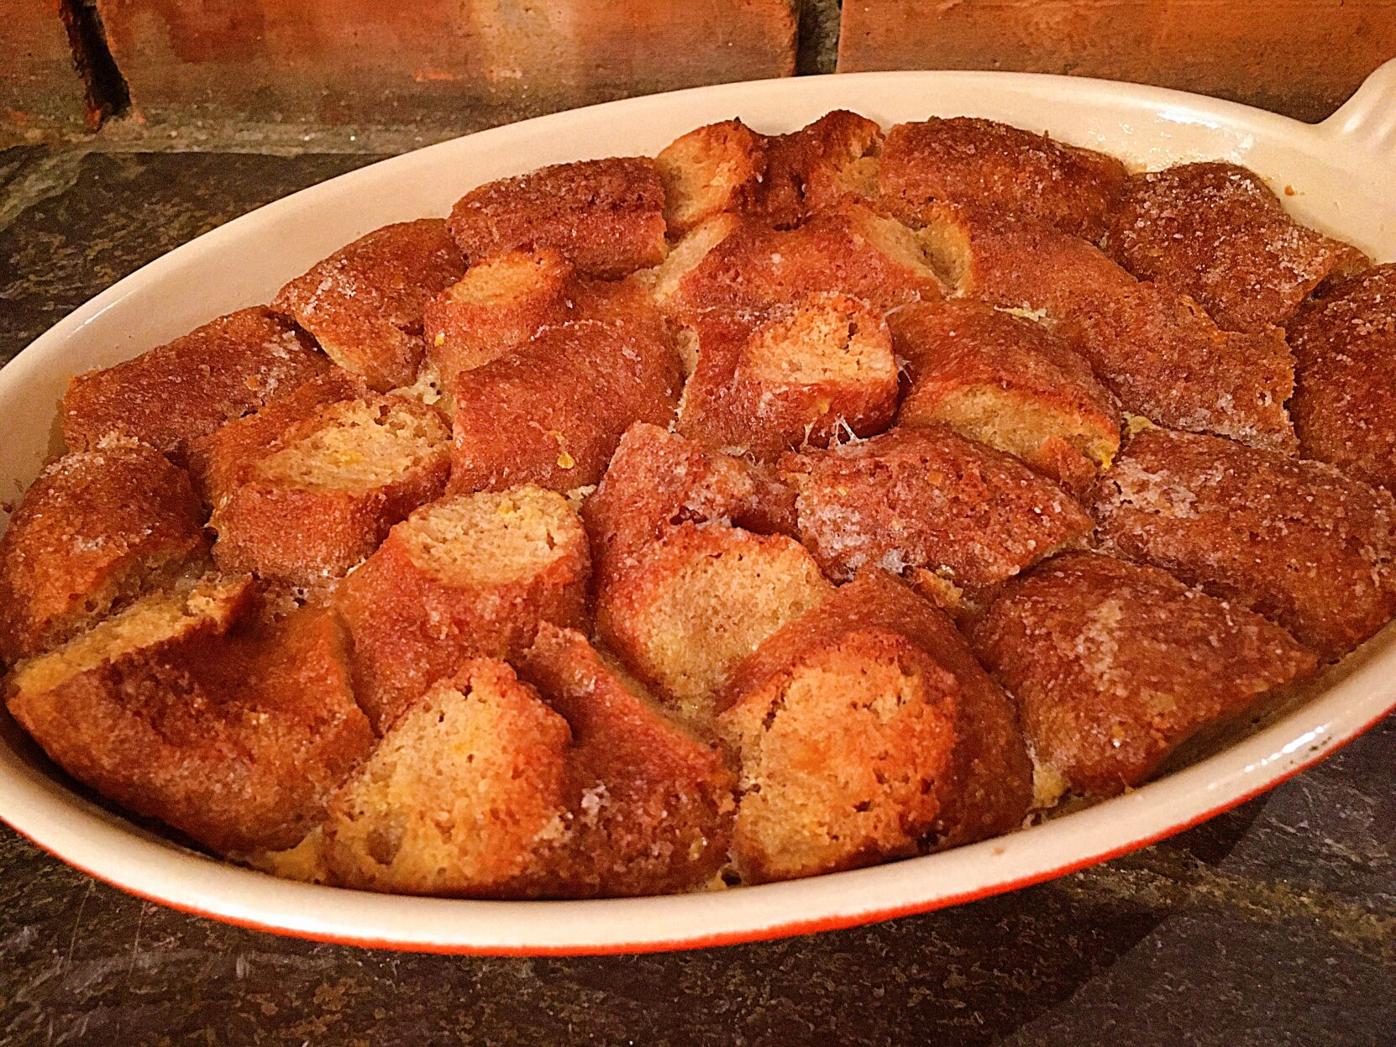 Bread pudding in a bowl